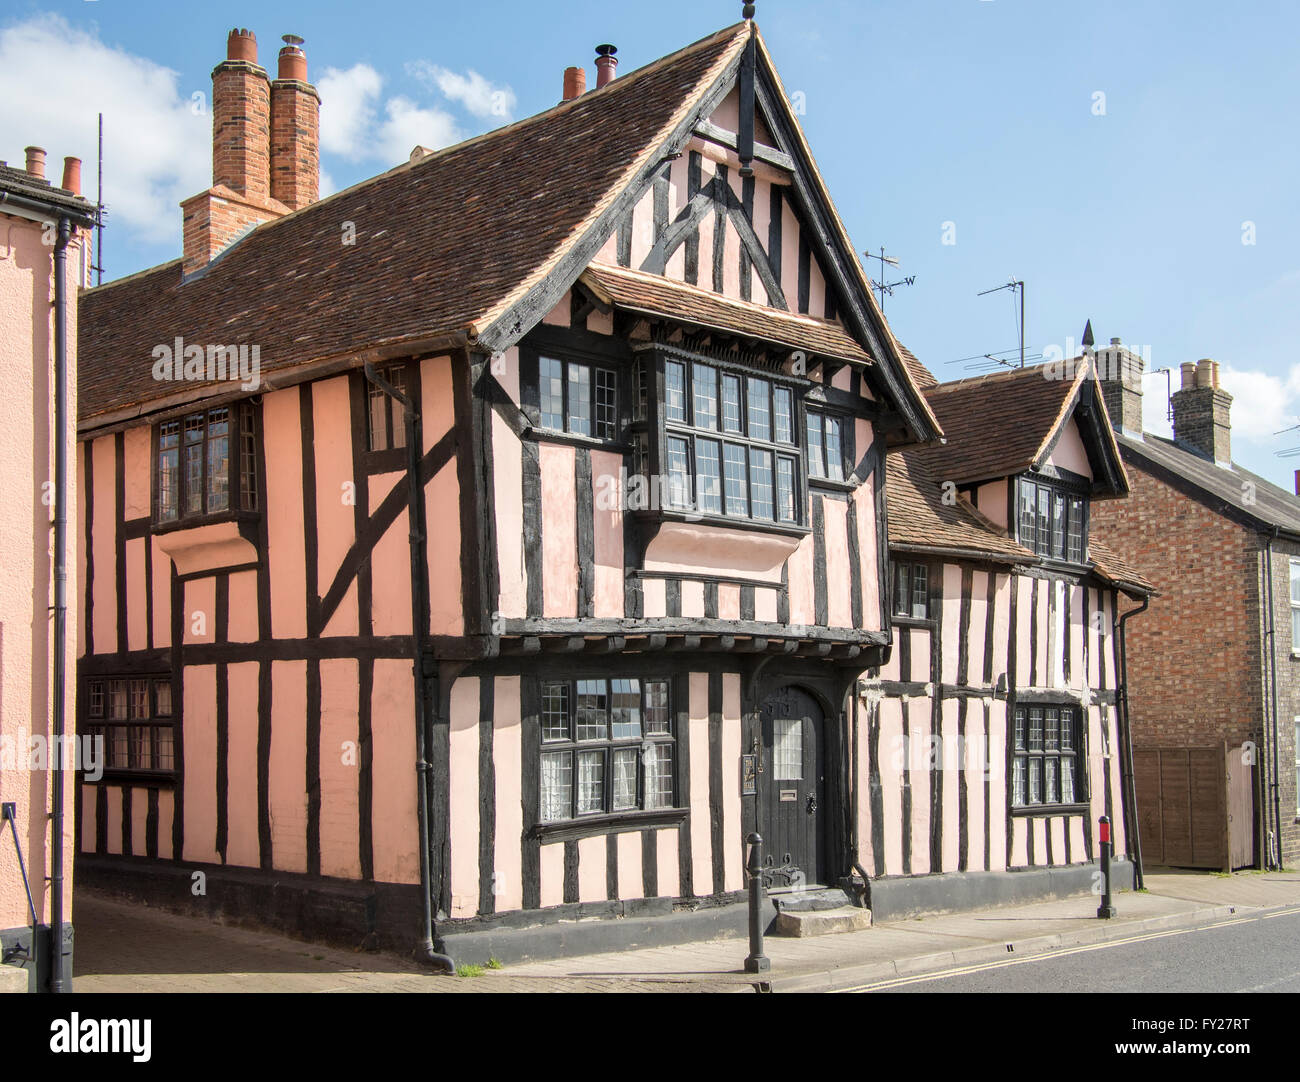 The exterior of the15th Century Old Moot Hall in Sudbury, Suffolk, England. Stock Photo